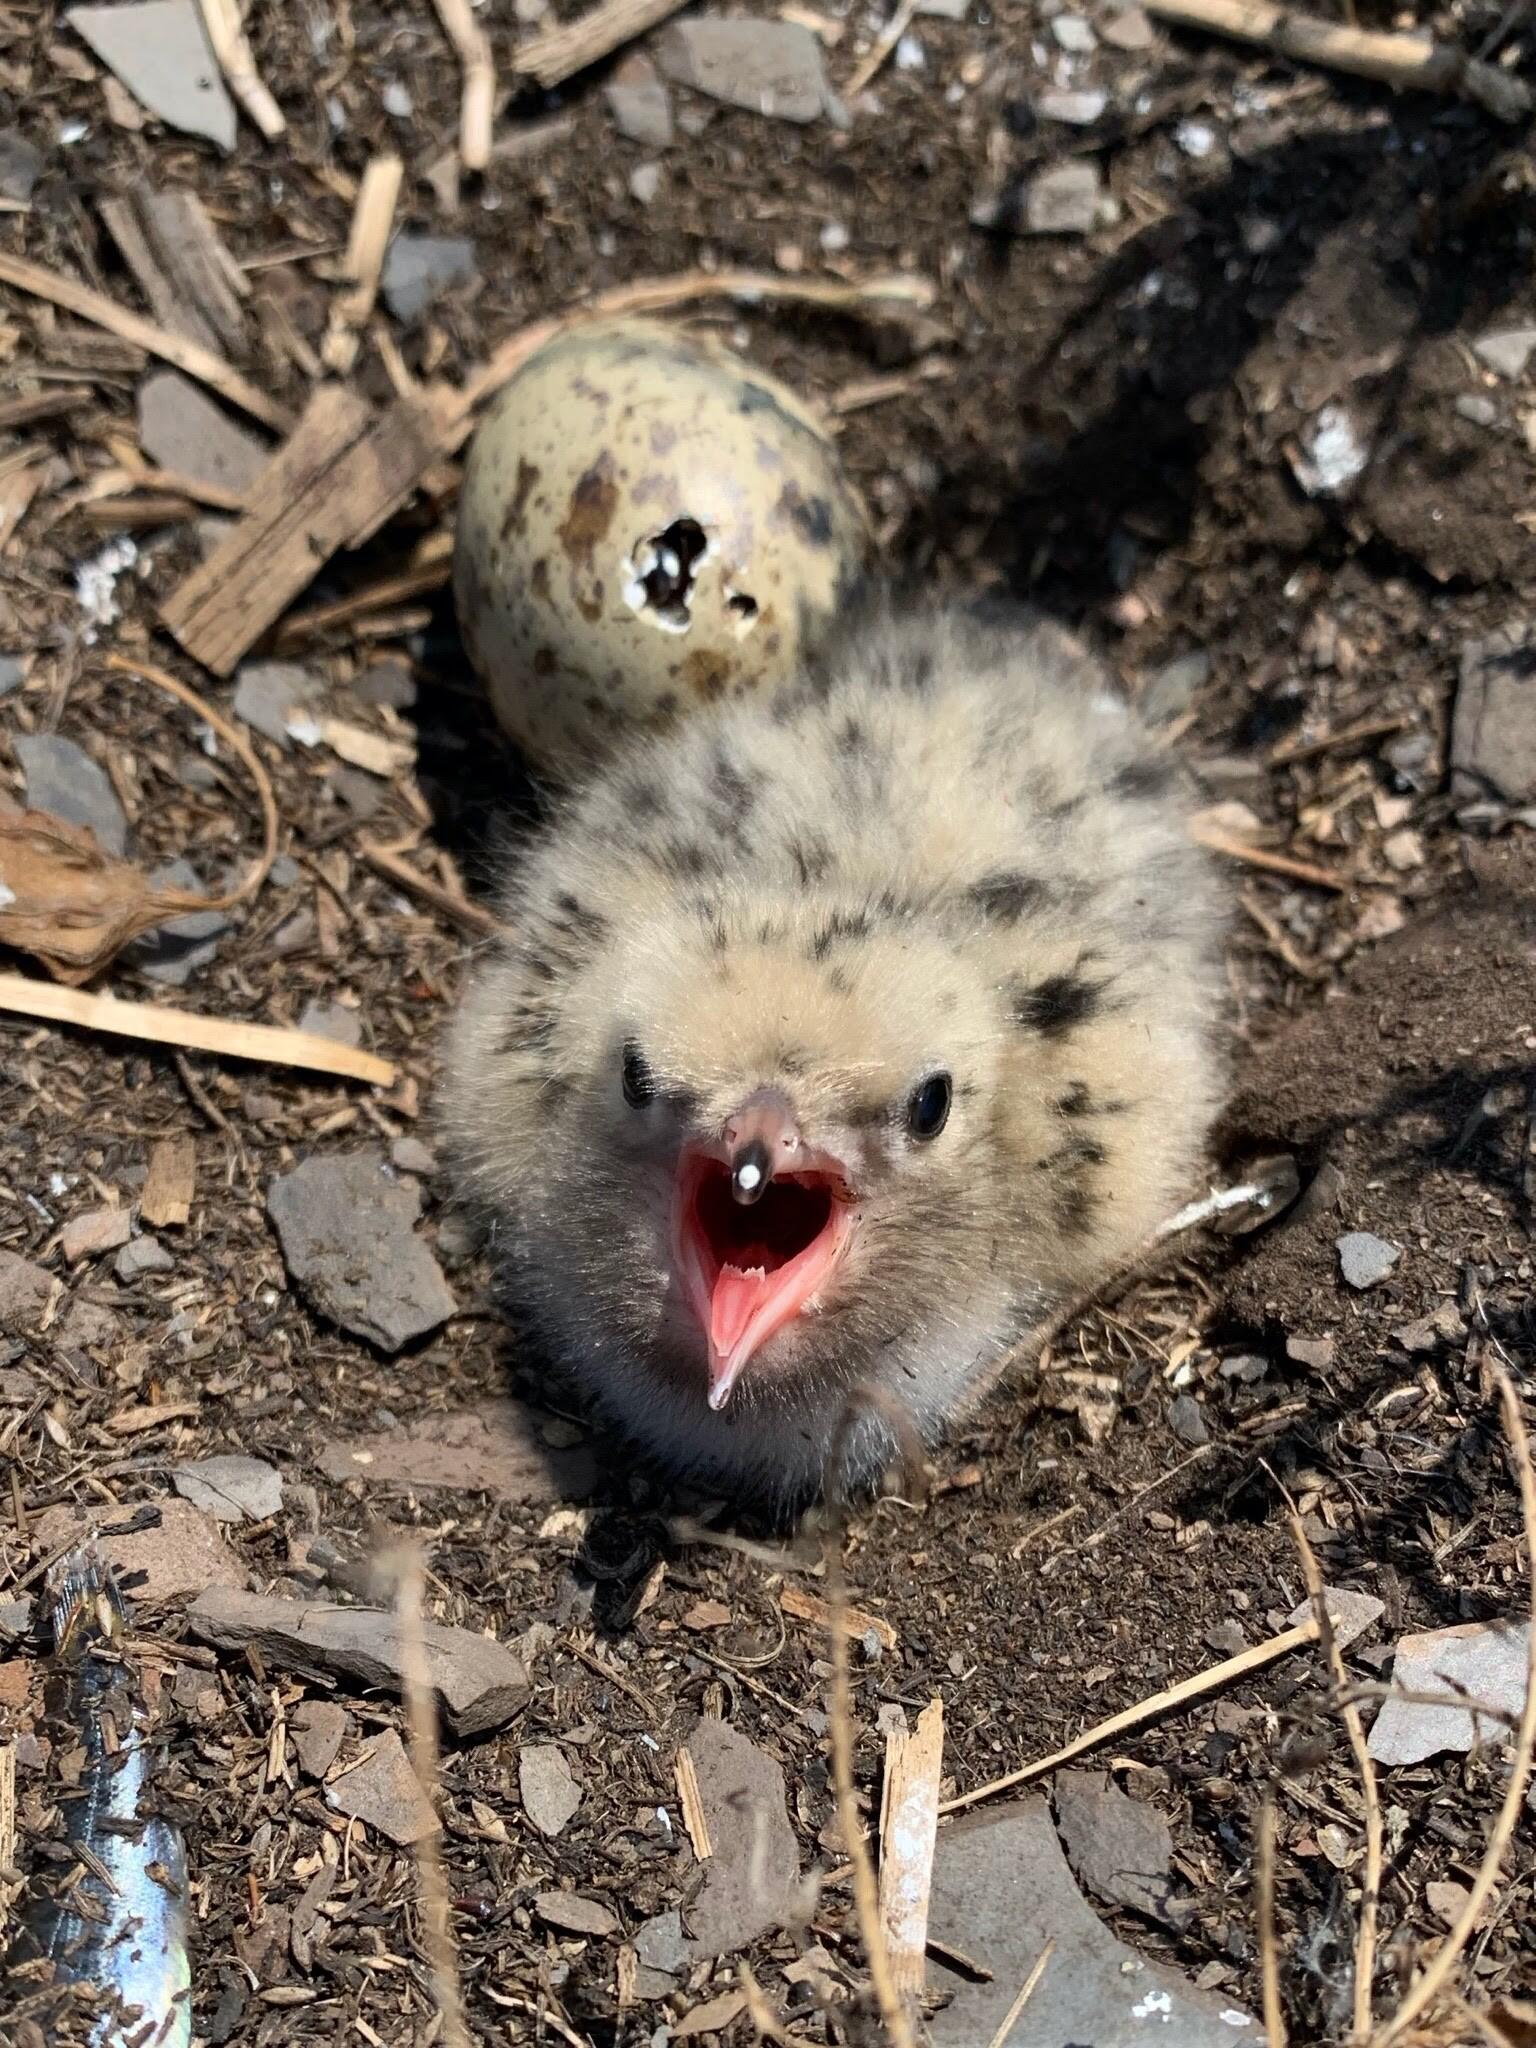 Common Tern chick, aged approximately 5 days old.